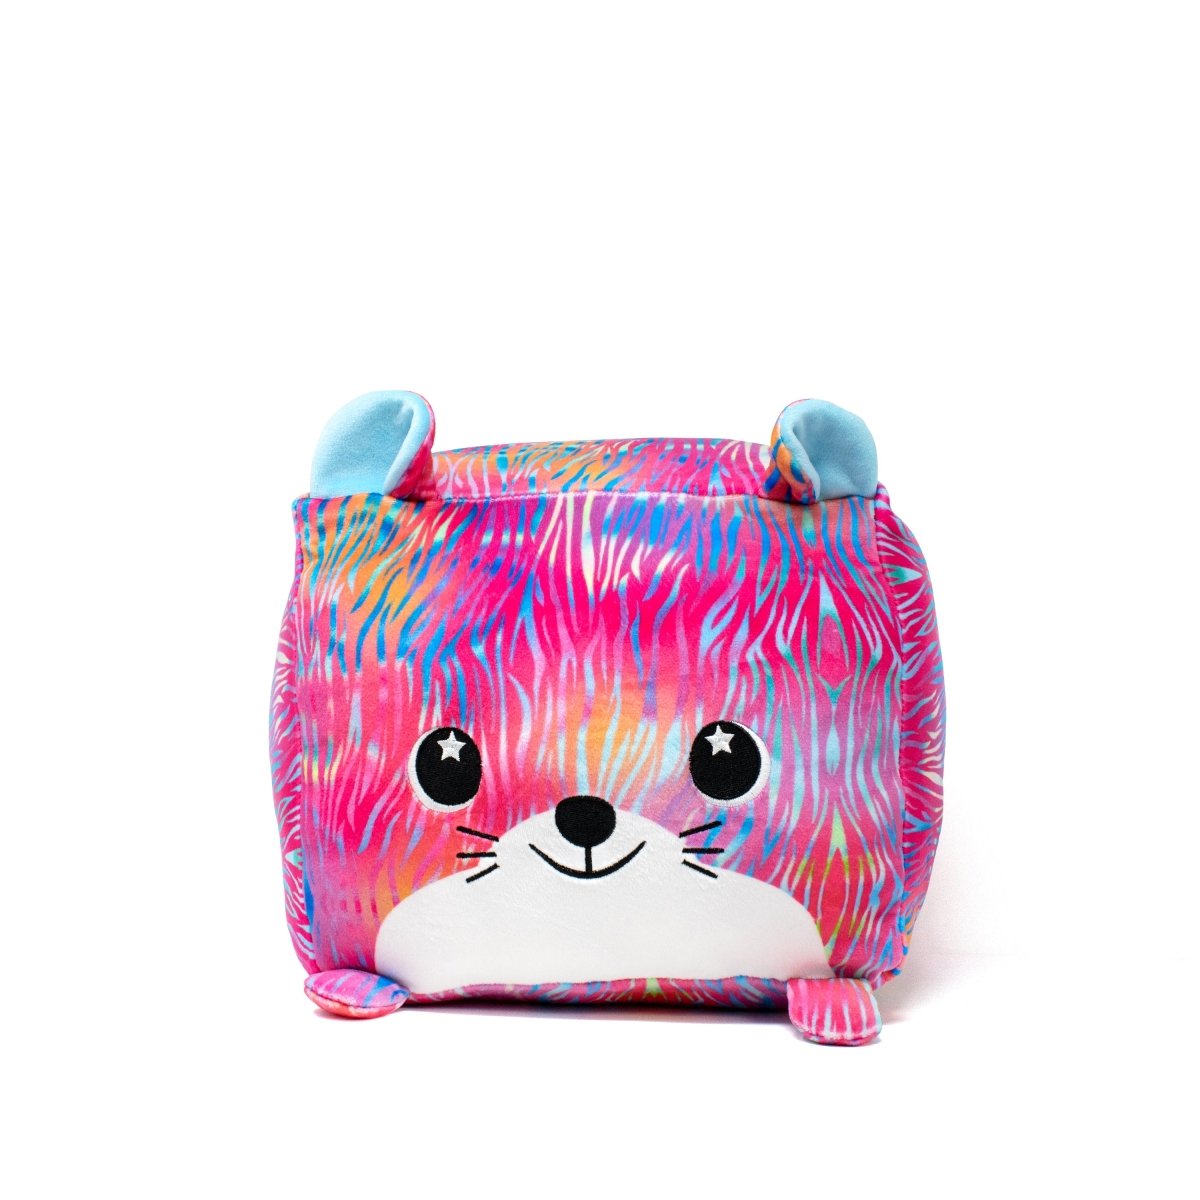 Diego the Tiger plush toy with vibrant rainbow fur and mischievous grin from Moosh-Moosh SQUARED² Collection.